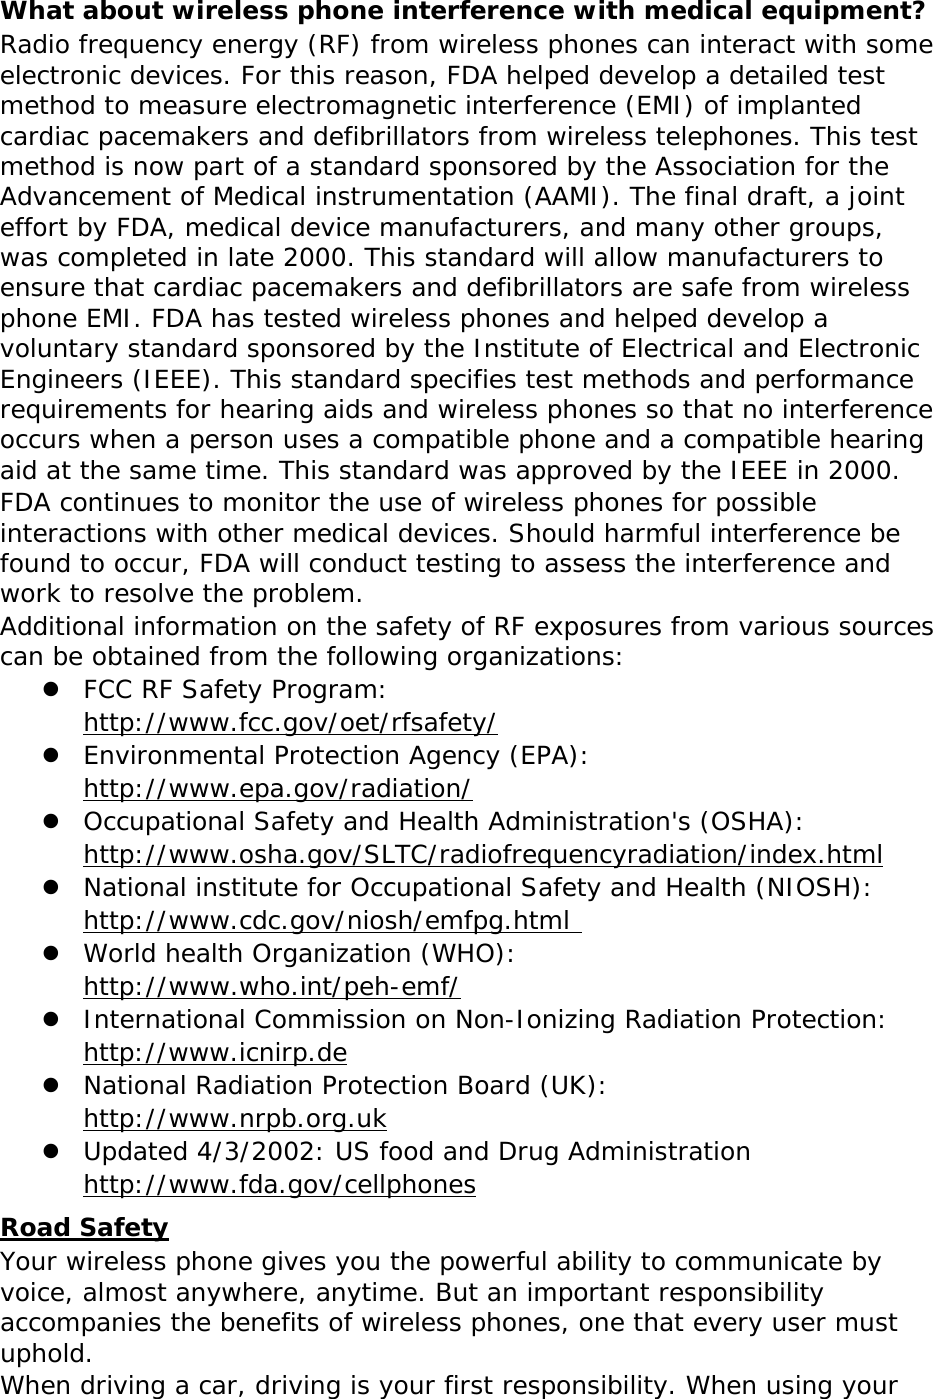 What about wireless phone interference with medical equipment? Radio frequency energy (RF) from wireless phones can interact with some electronic devices. For this reason, FDA helped develop a detailed test method to measure electromagnetic interference (EMI) of implanted cardiac pacemakers and defibrillators from wireless telephones. This test method is now part of a standard sponsored by the Association for the Advancement of Medical instrumentation (AAMI). The final draft, a joint effort by FDA, medical device manufacturers, and many other groups, was completed in late 2000. This standard will allow manufacturers to ensure that cardiac pacemakers and defibrillators are safe from wireless phone EMI. FDA has tested wireless phones and helped develop a voluntary standard sponsored by the Institute of Electrical and Electronic Engineers (IEEE). This standard specifies test methods and performance requirements for hearing aids and wireless phones so that no interference occurs when a person uses a compatible phone and a compatible hearing aid at the same time. This standard was approved by the IEEE in 2000. FDA continues to monitor the use of wireless phones for possible interactions with other medical devices. Should harmful interference be found to occur, FDA will conduct testing to assess the interference and work to resolve the problem. Additional information on the safety of RF exposures from various sources can be obtained from the following organizations:  FCC RF Safety Program:  http://www.fcc.gov/oet/rfsafety/  Environmental Protection Agency (EPA):  http://www.epa.gov/radiation/  Occupational Safety and Health Administration&apos;s (OSHA):        http://www.osha.gov/SLTC/radiofrequencyradiation/index.html  National institute for Occupational Safety and Health (NIOSH):  http://www.cdc.gov/niosh/emfpg.html   World health Organization (WHO):  http://www.who.int/peh-emf/  International Commission on Non-Ionizing Radiation Protection:  http://www.icnirp.de  National Radiation Protection Board (UK):  http://www.nrpb.org.uk  Updated 4/3/2002: US food and Drug Administration  http://www.fda.gov/cellphones Road Safety Your wireless phone gives you the powerful ability to communicate by voice, almost anywhere, anytime. But an important responsibility accompanies the benefits of wireless phones, one that every user must uphold. When driving a car, driving is your first responsibility. When using your 